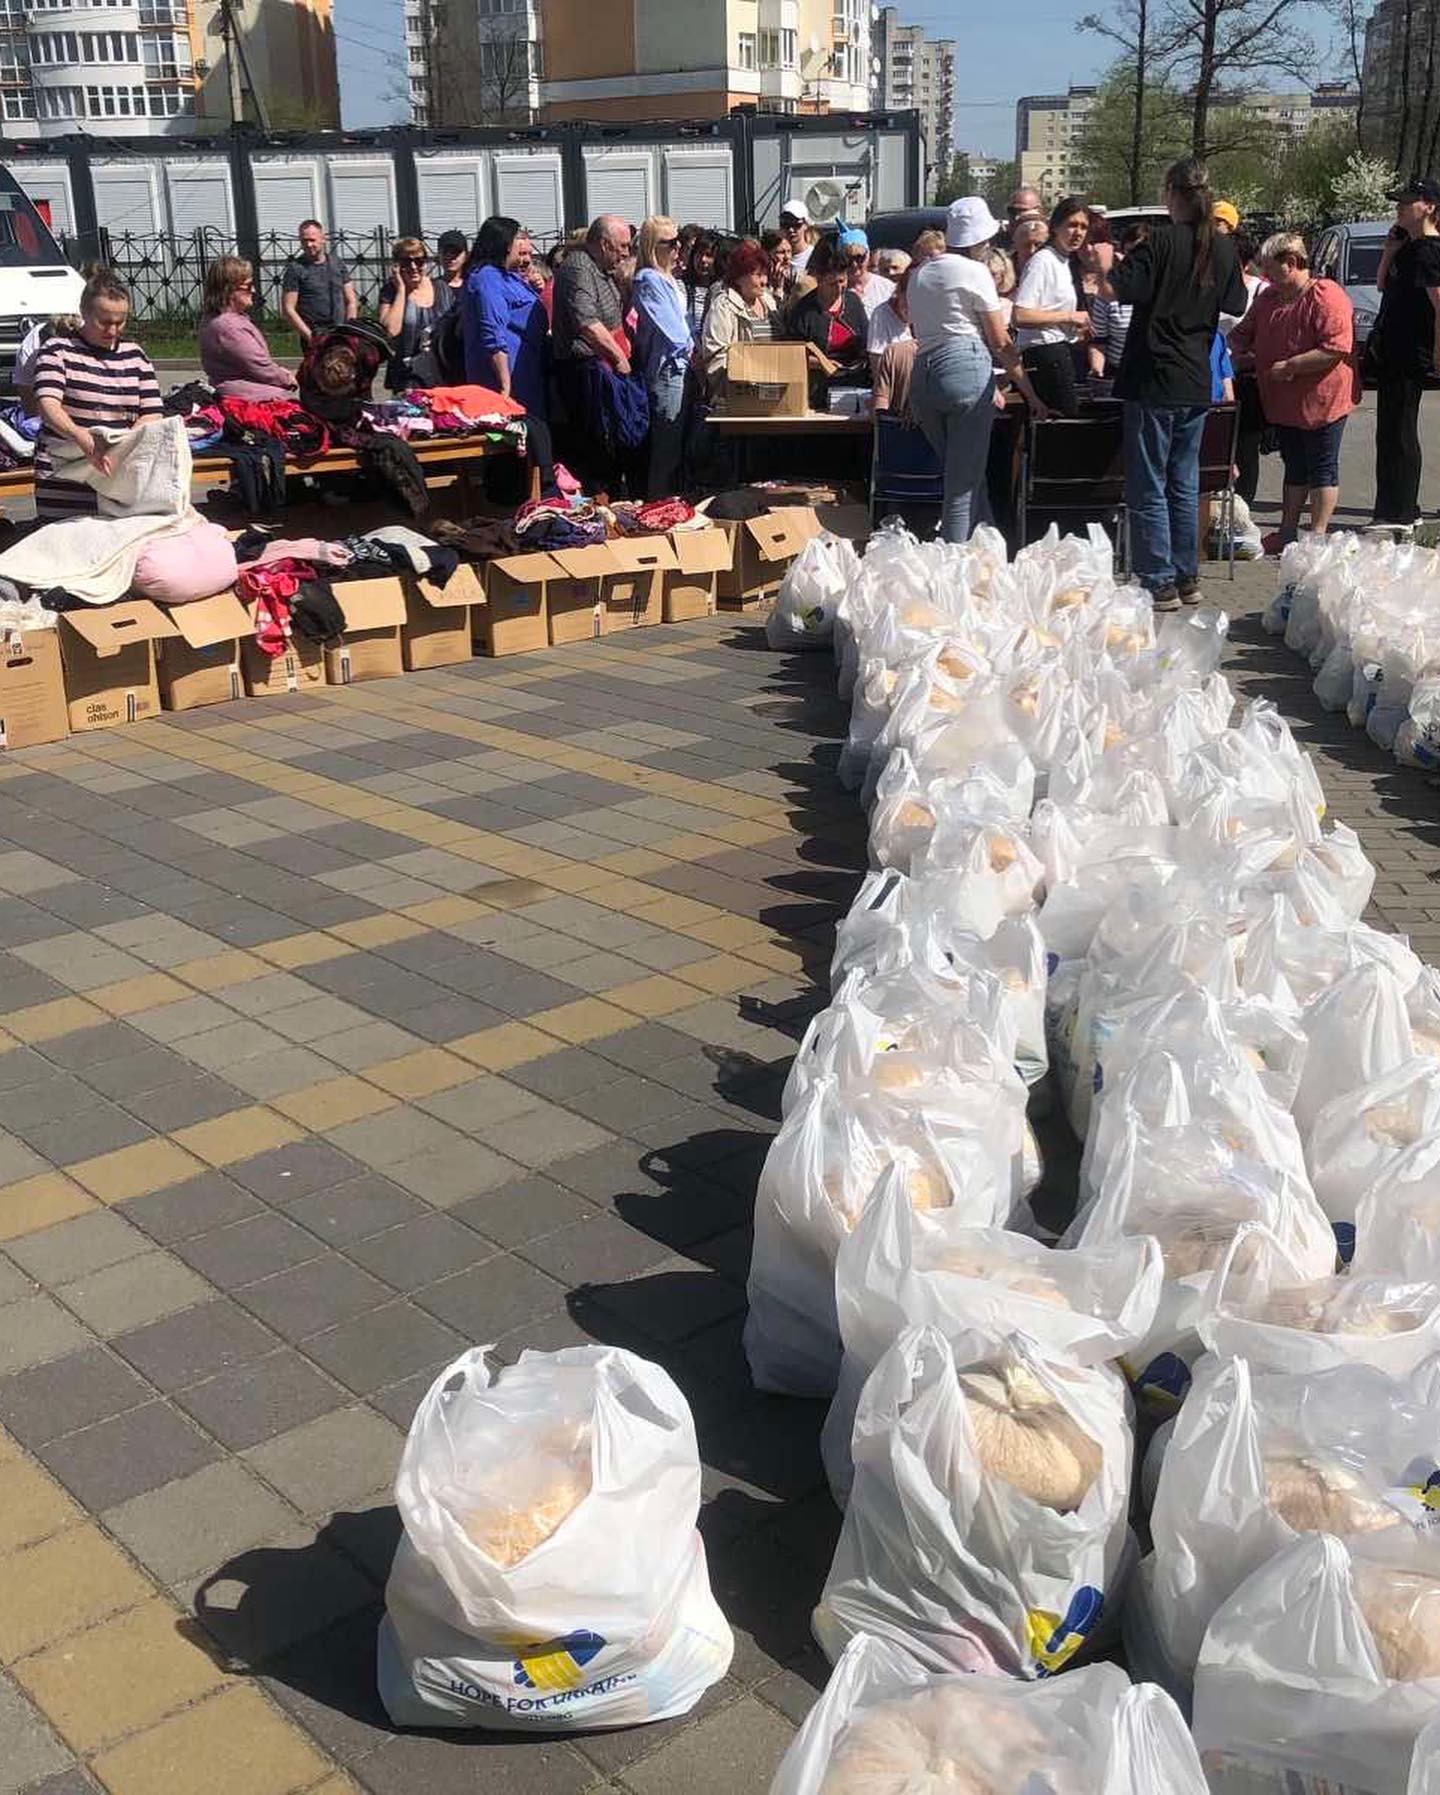 People gather around tables distributing clothes and food packed in bags, with onlookers standing in a sunny outdoor setting.